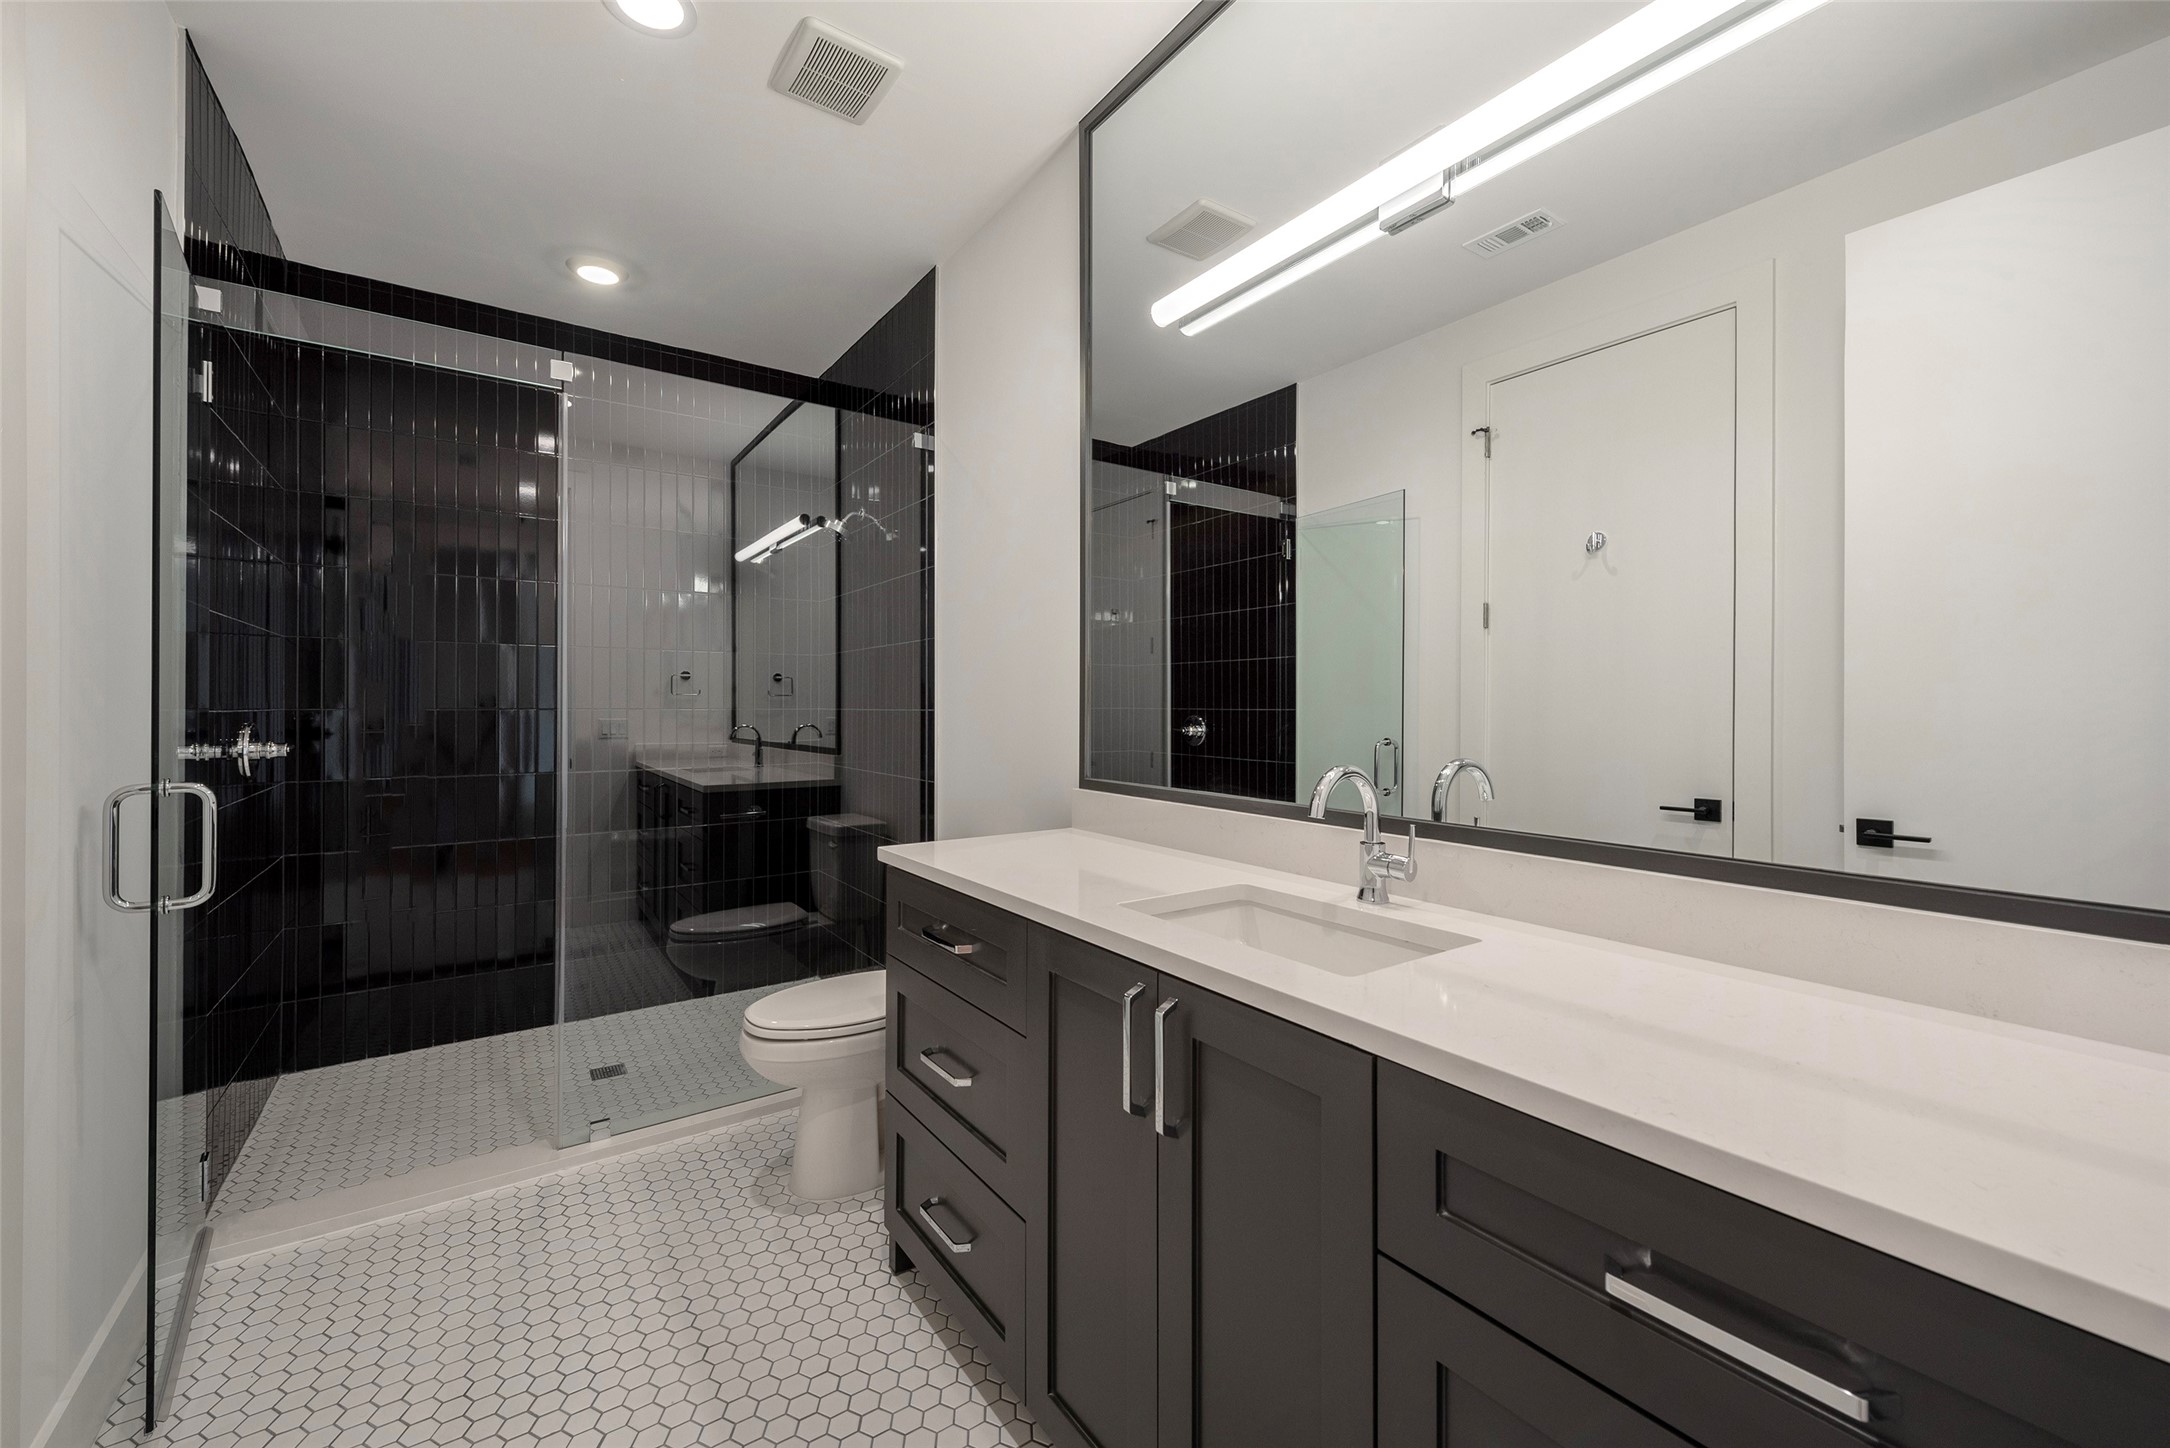 One of the secondary bathrooms...simply elegant!